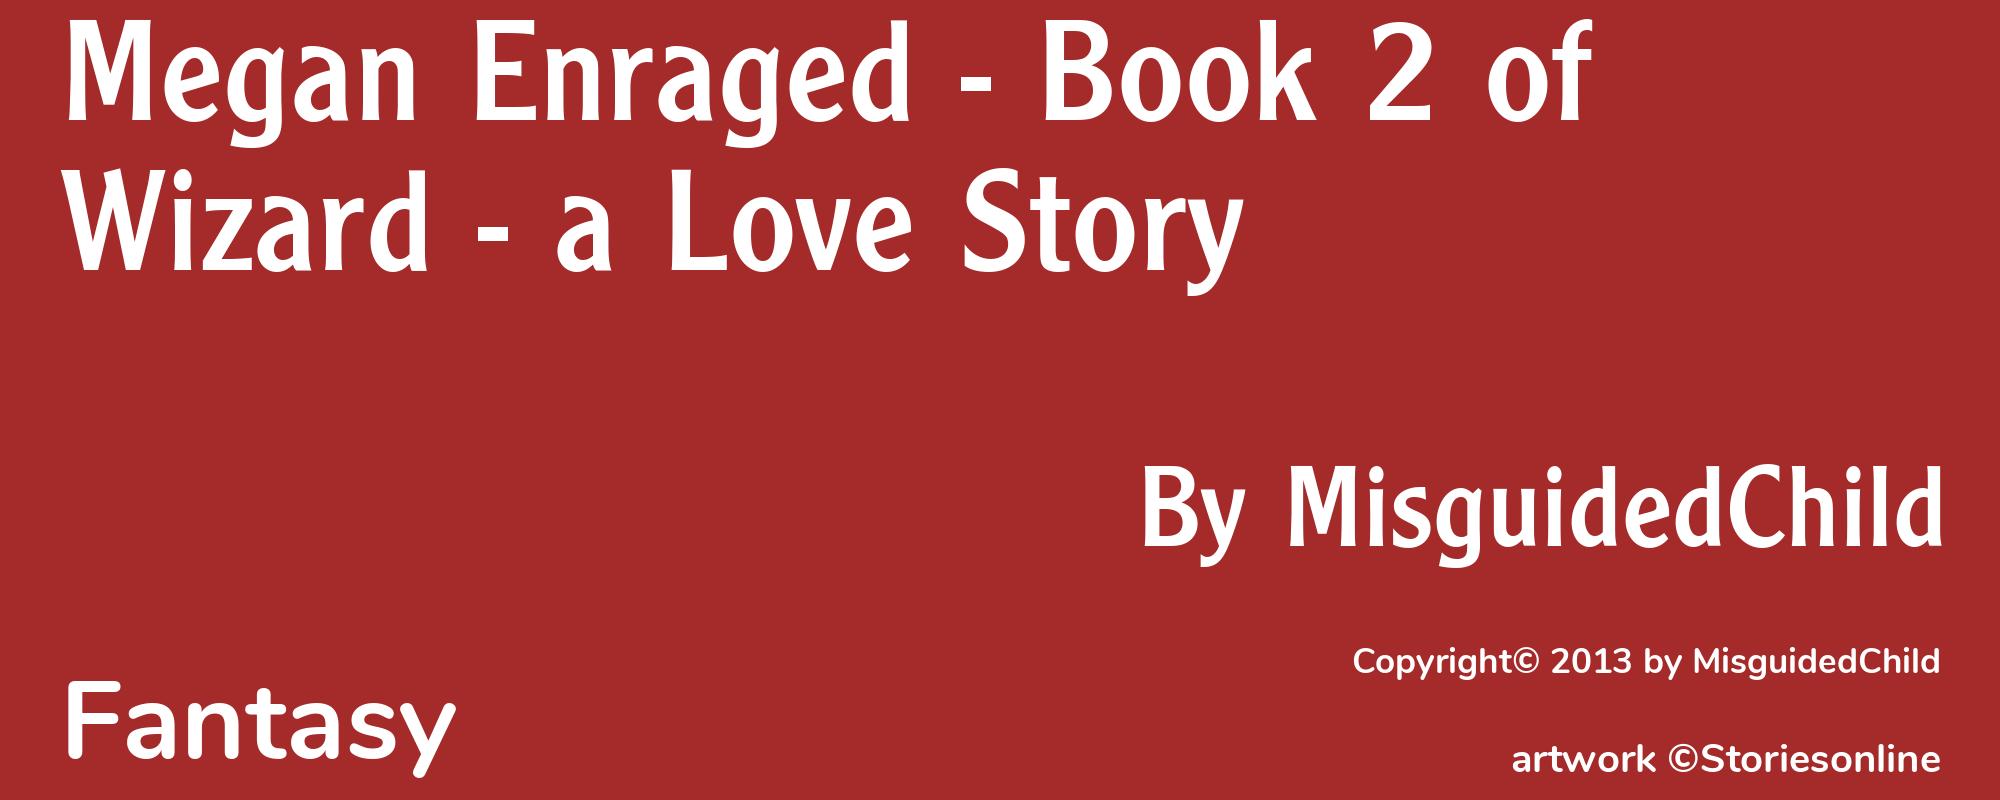 Megan Enraged - Book 2 of Wizard - a Love Story - Cover